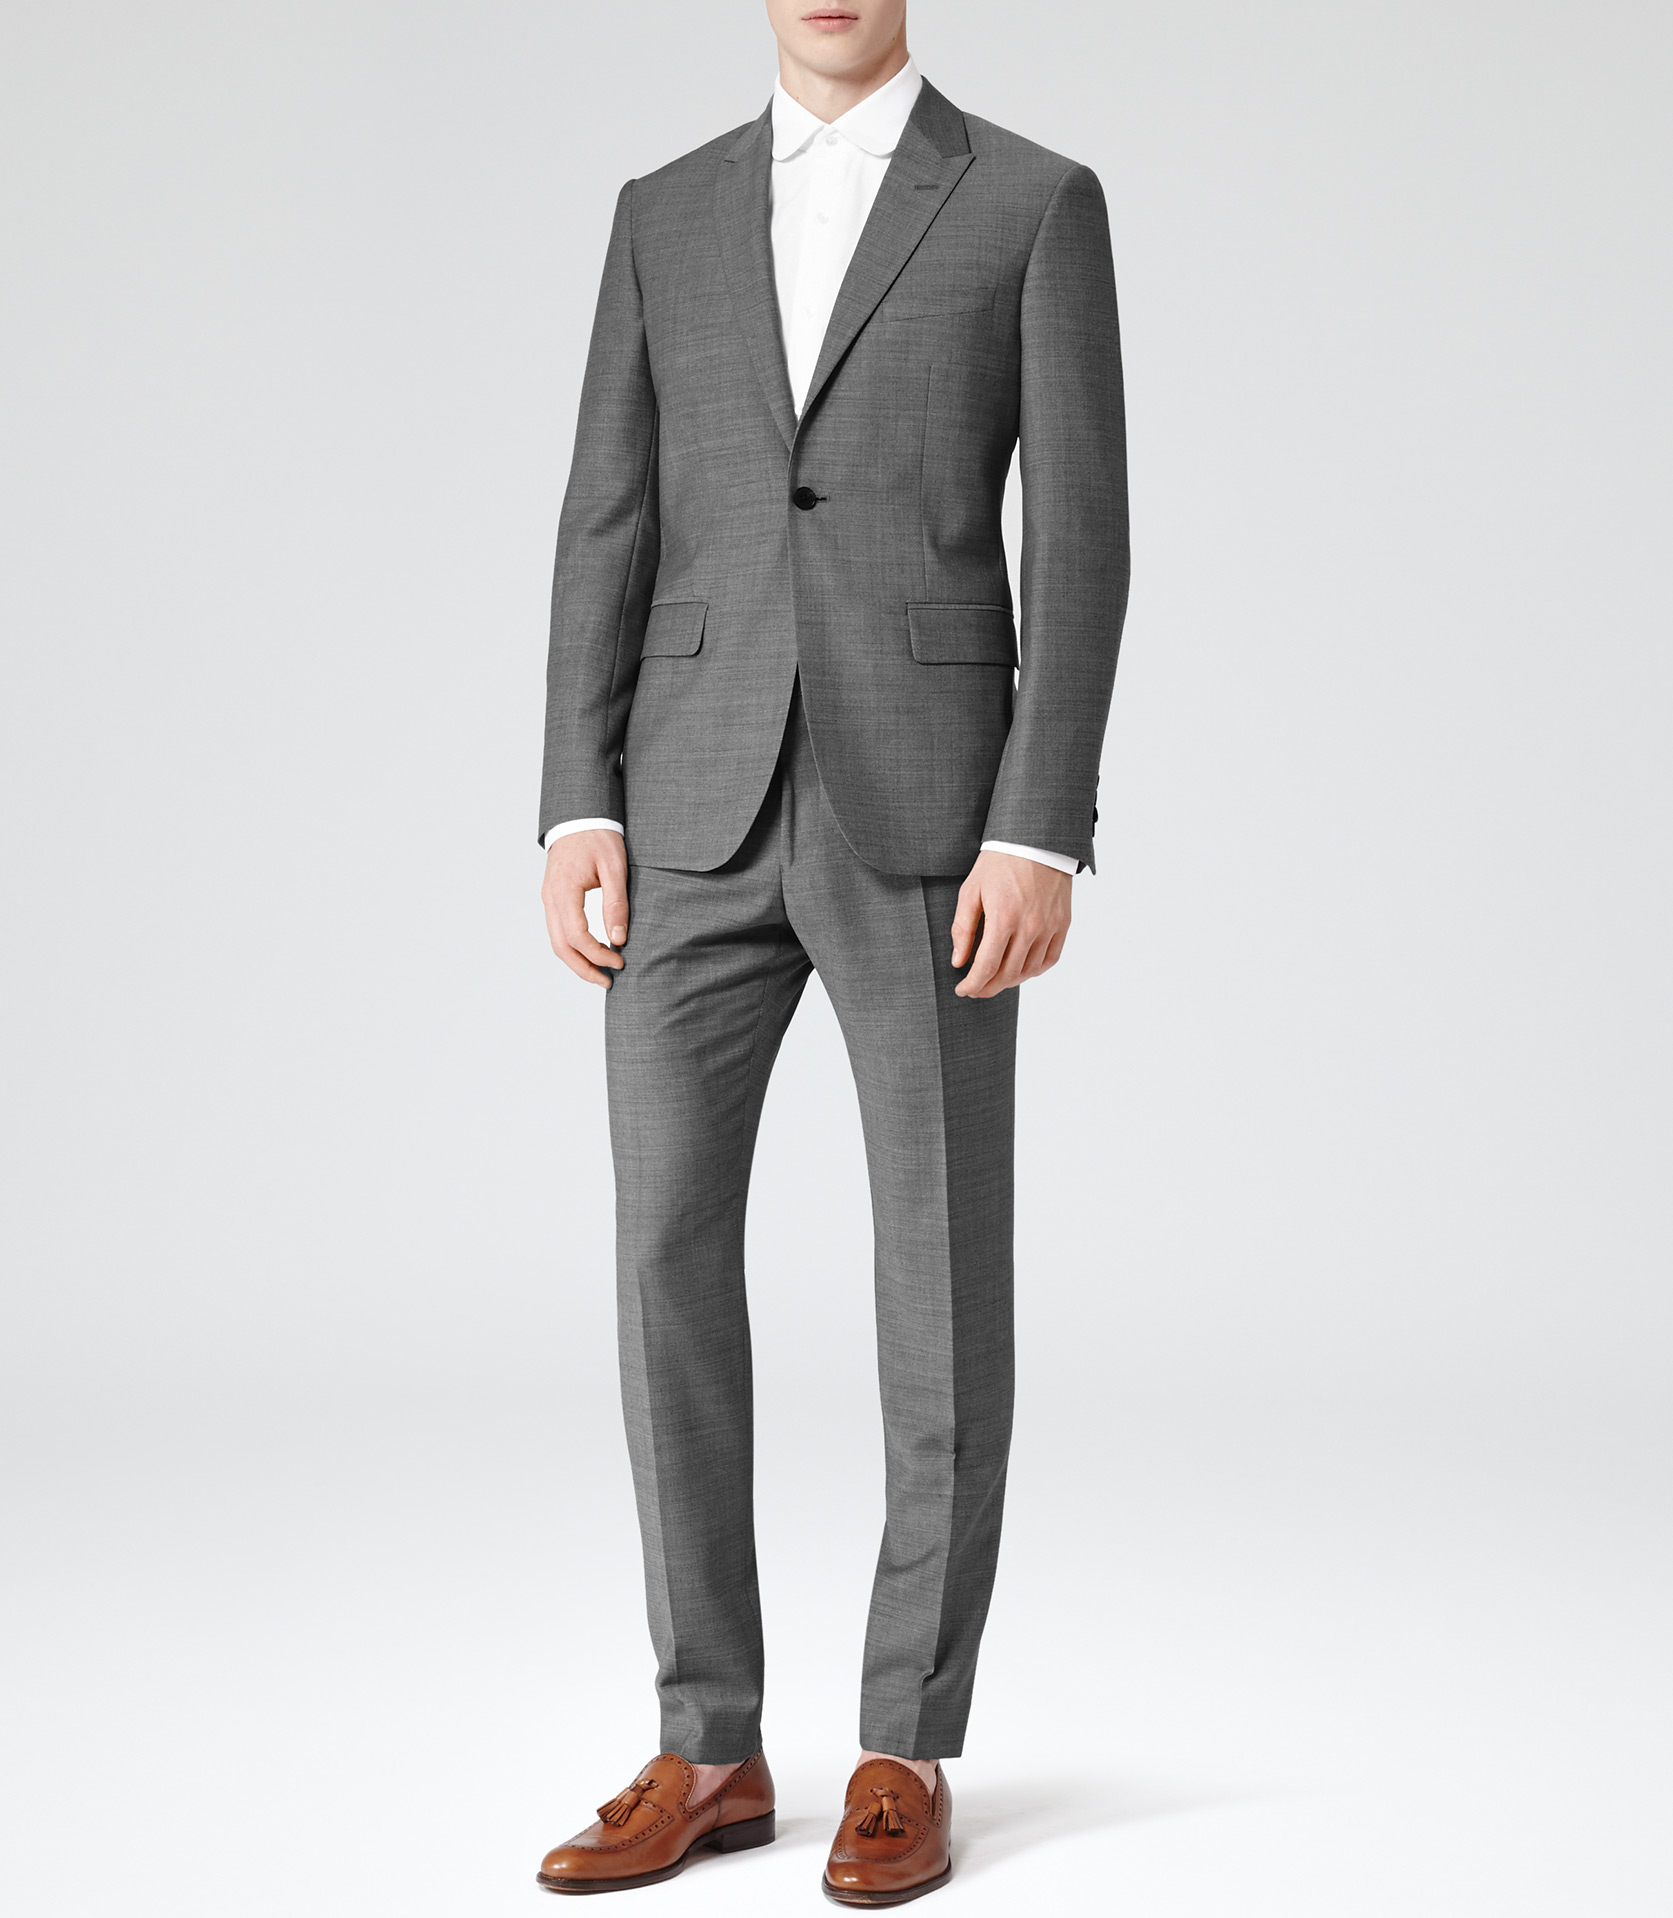 Lyst - Reiss Youngs One Button Peak Lapel Suit in Gray for Men